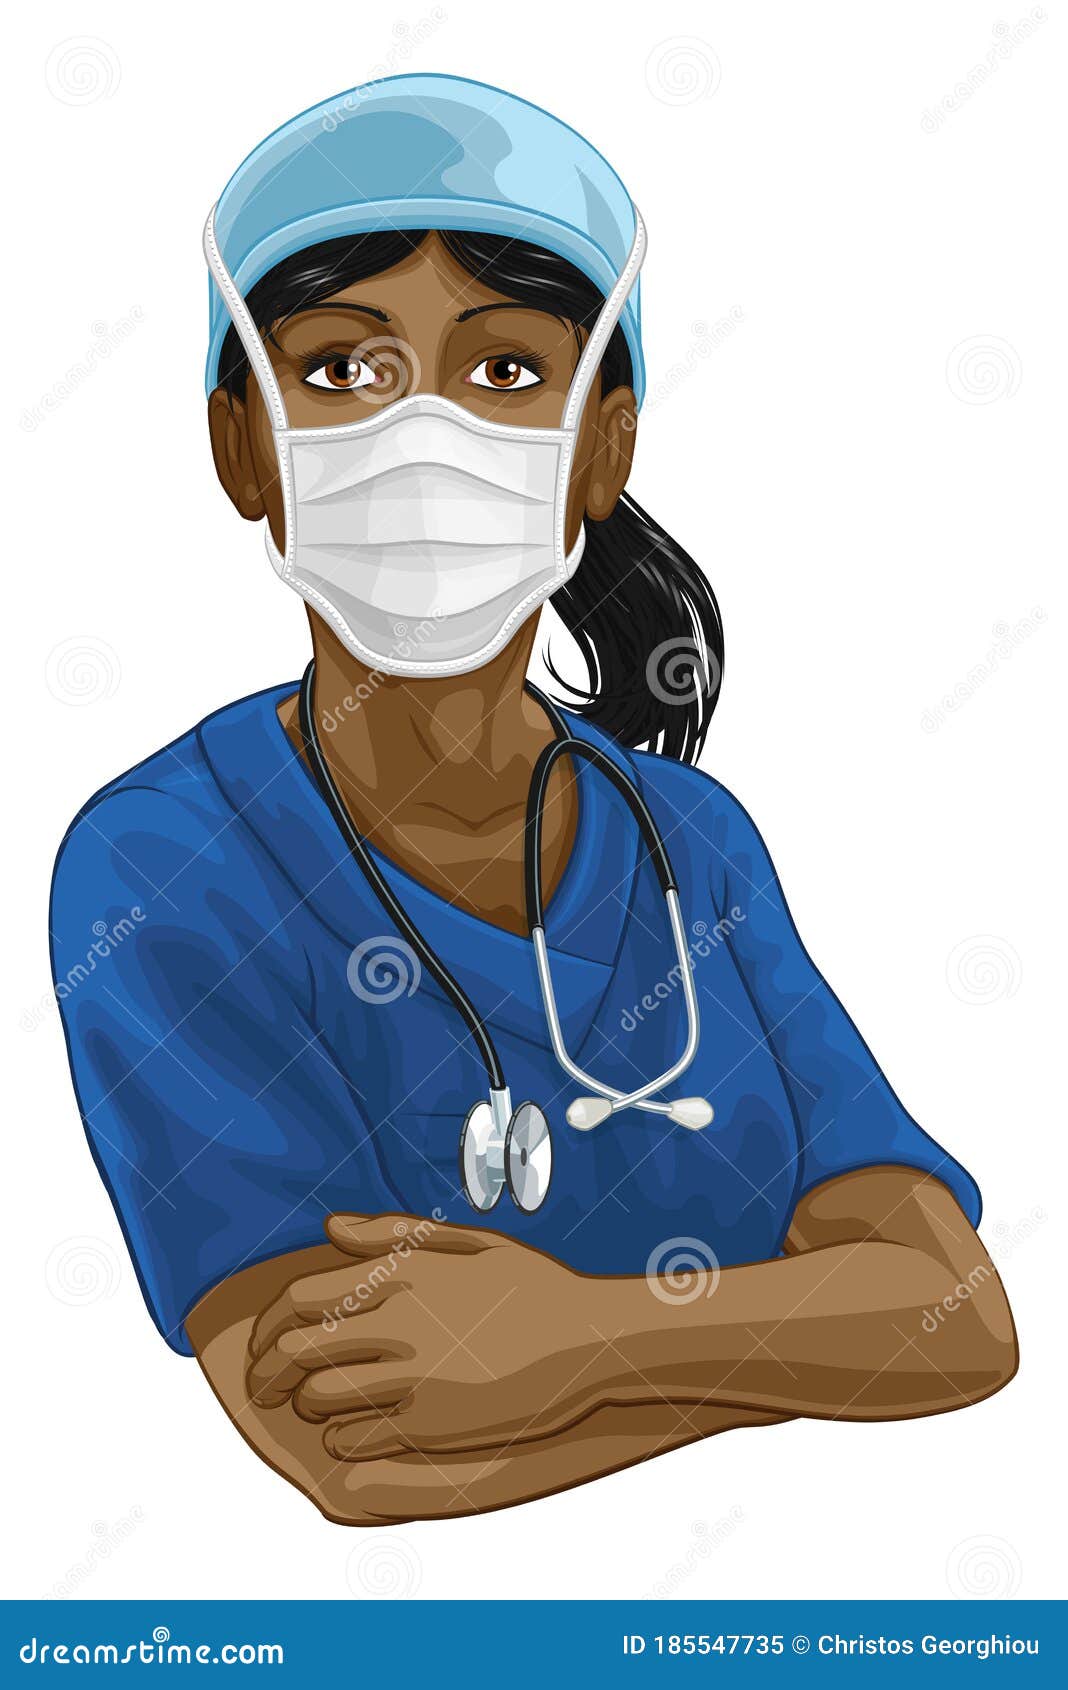 Ppe Cartoons, Illustrations & Vector Stock Images - 4739 Pictures to